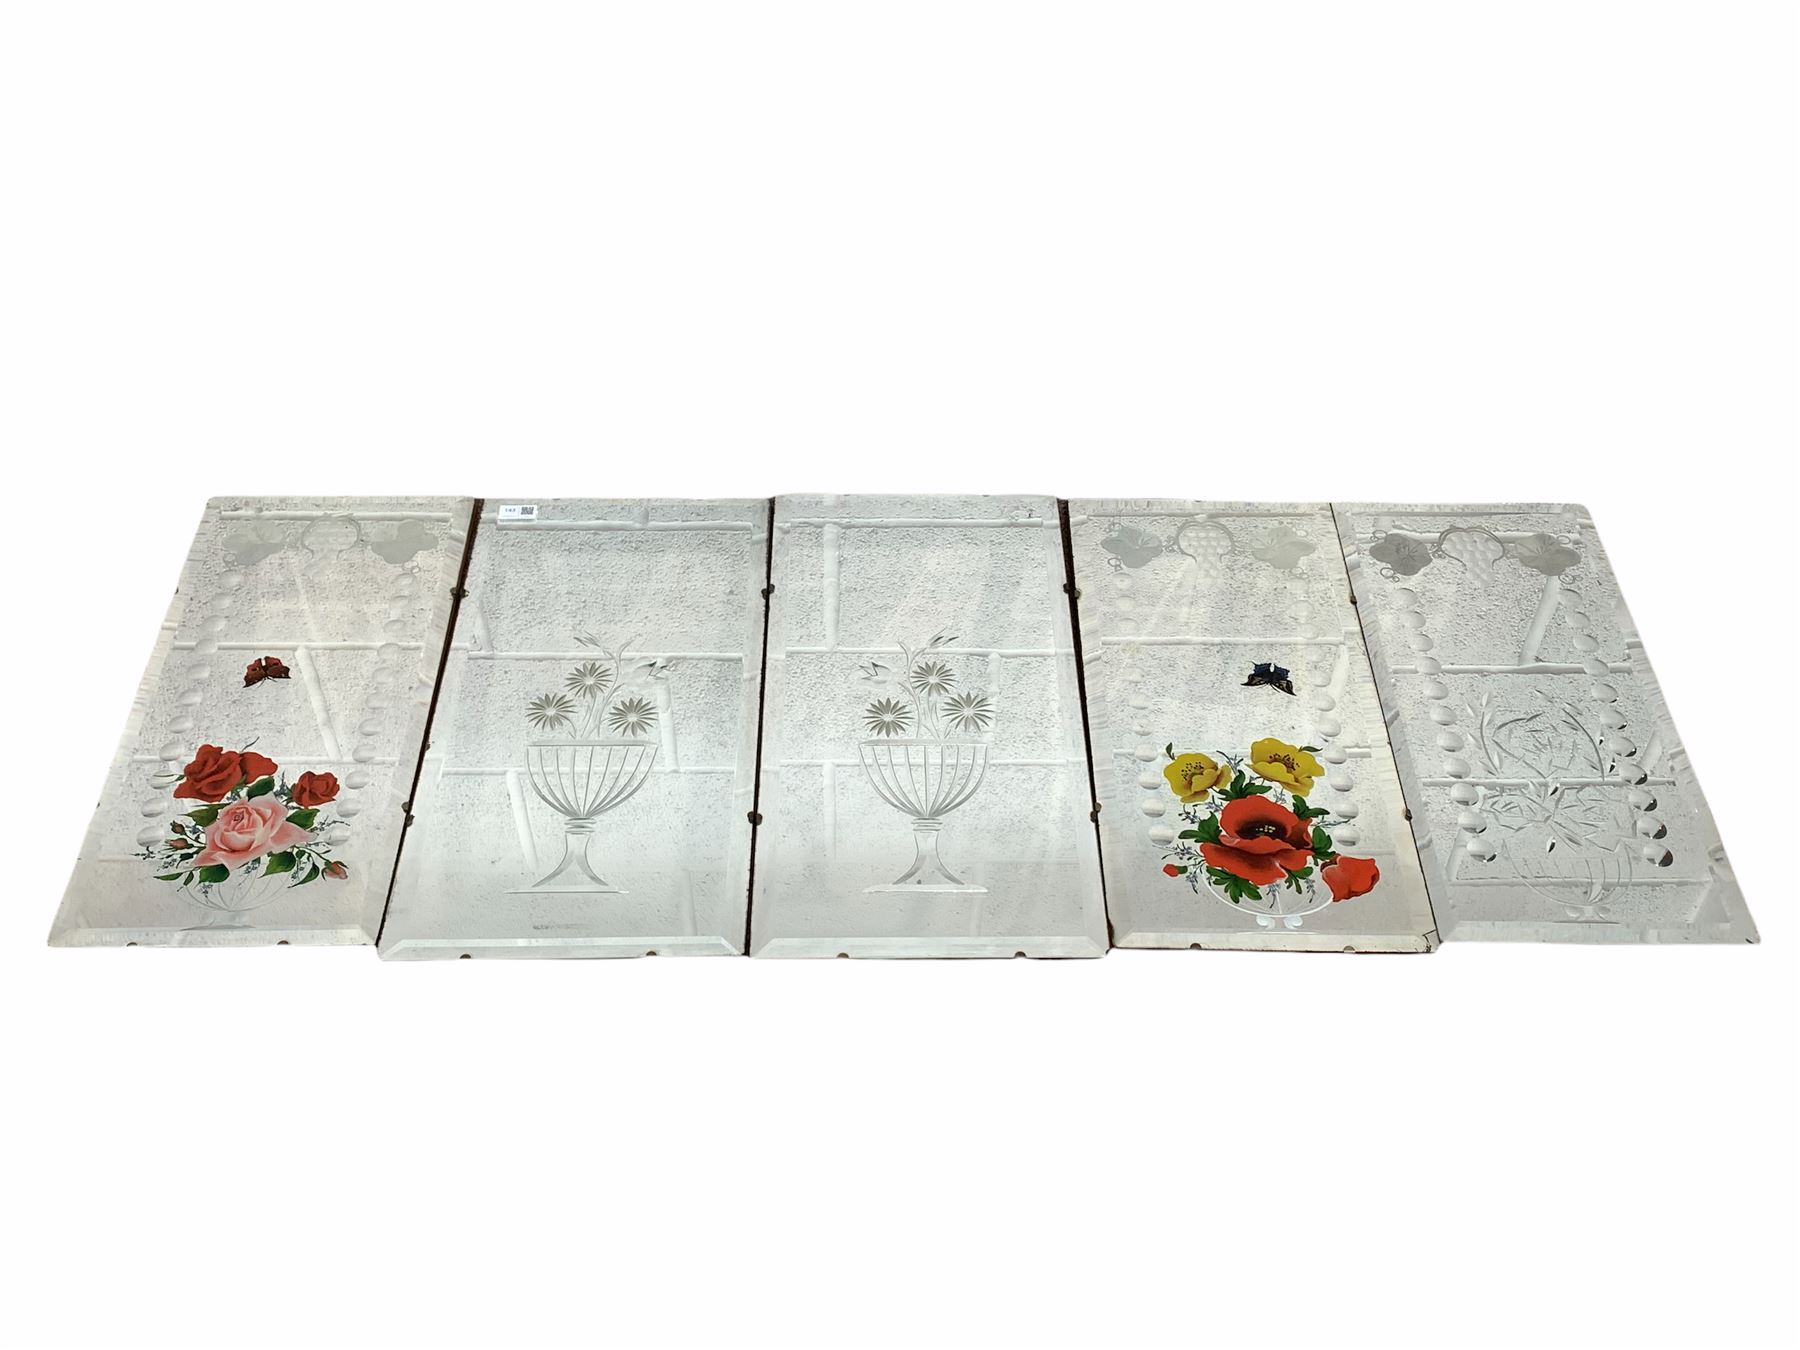 Pair of bevelled mirror panels engraved with floral bouquets issuing from fluted vase